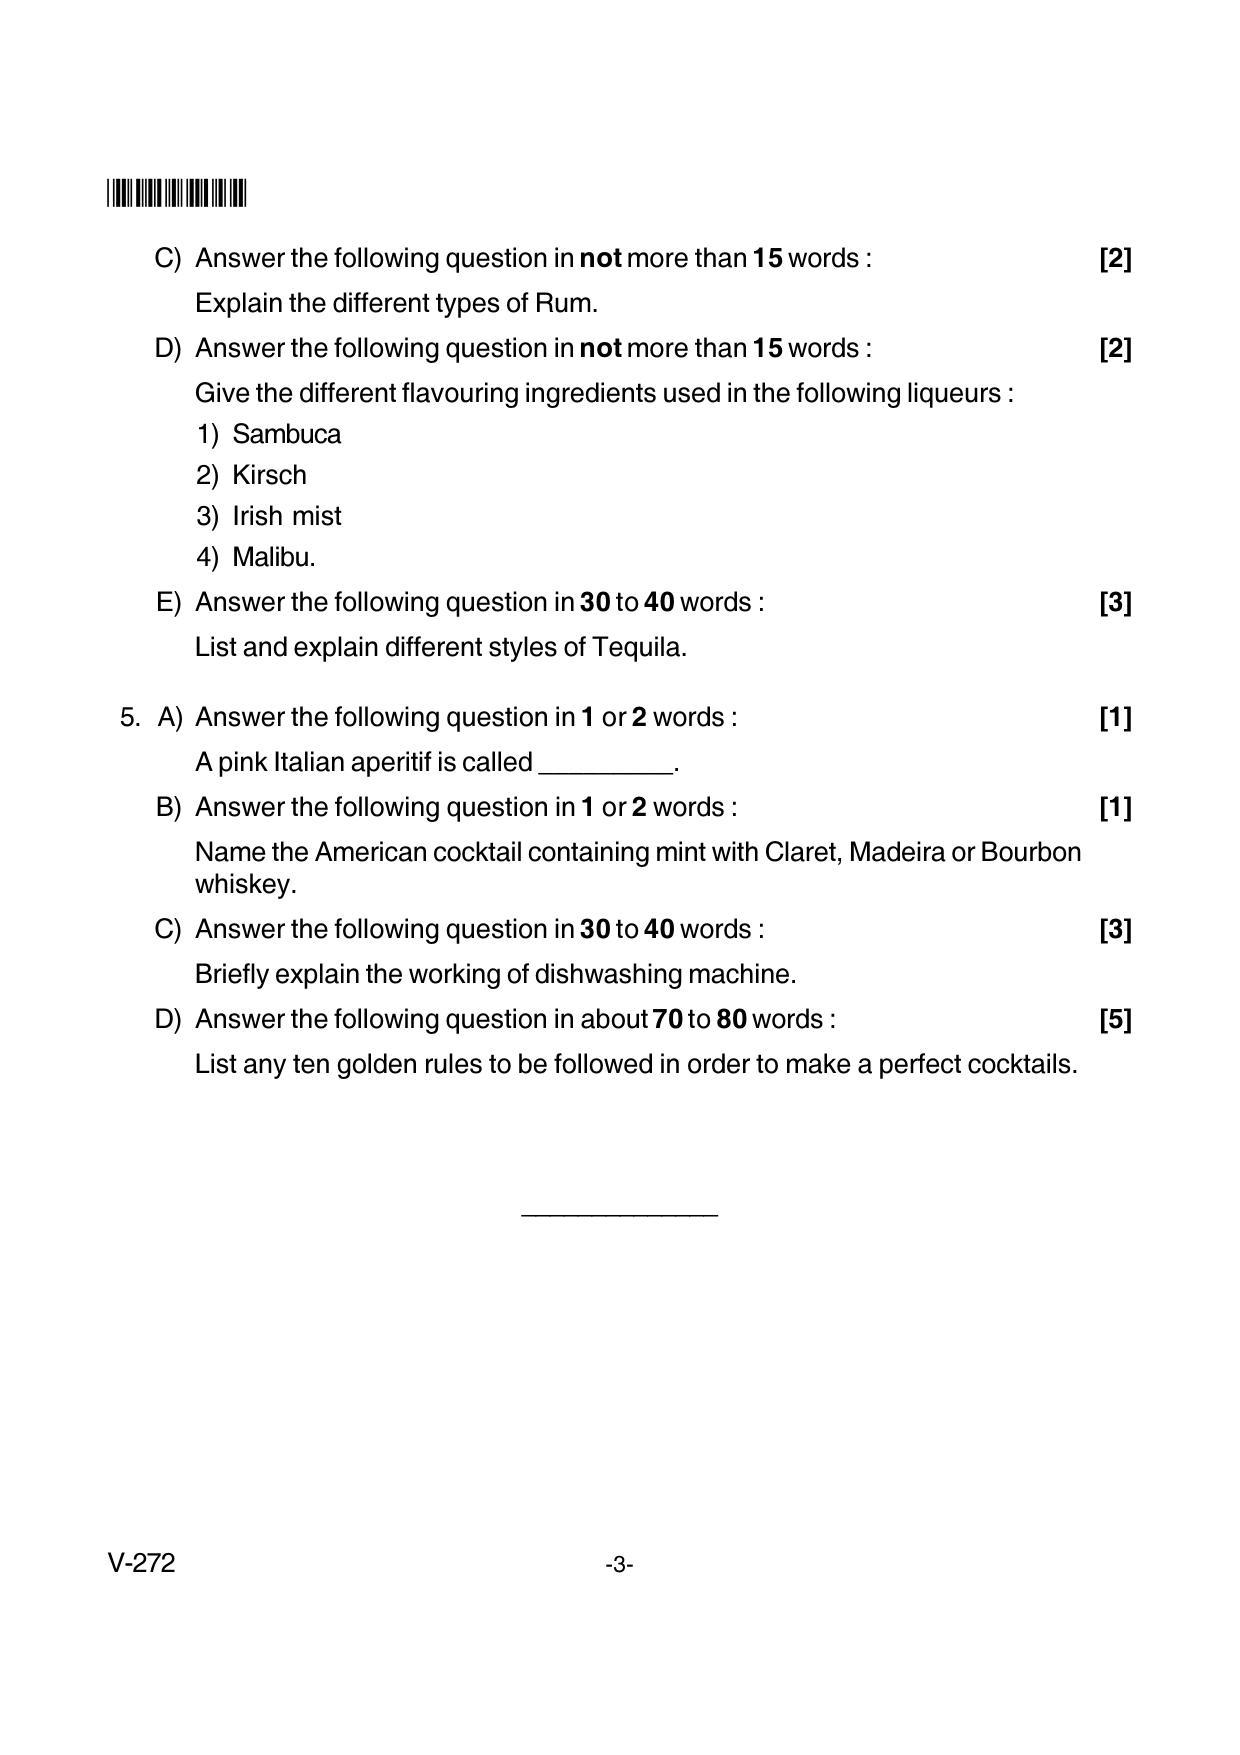 Goa Board Class 12 Food & Beverage Service  Voc 272 Old Pattern (March 2018) Question Paper - Page 3